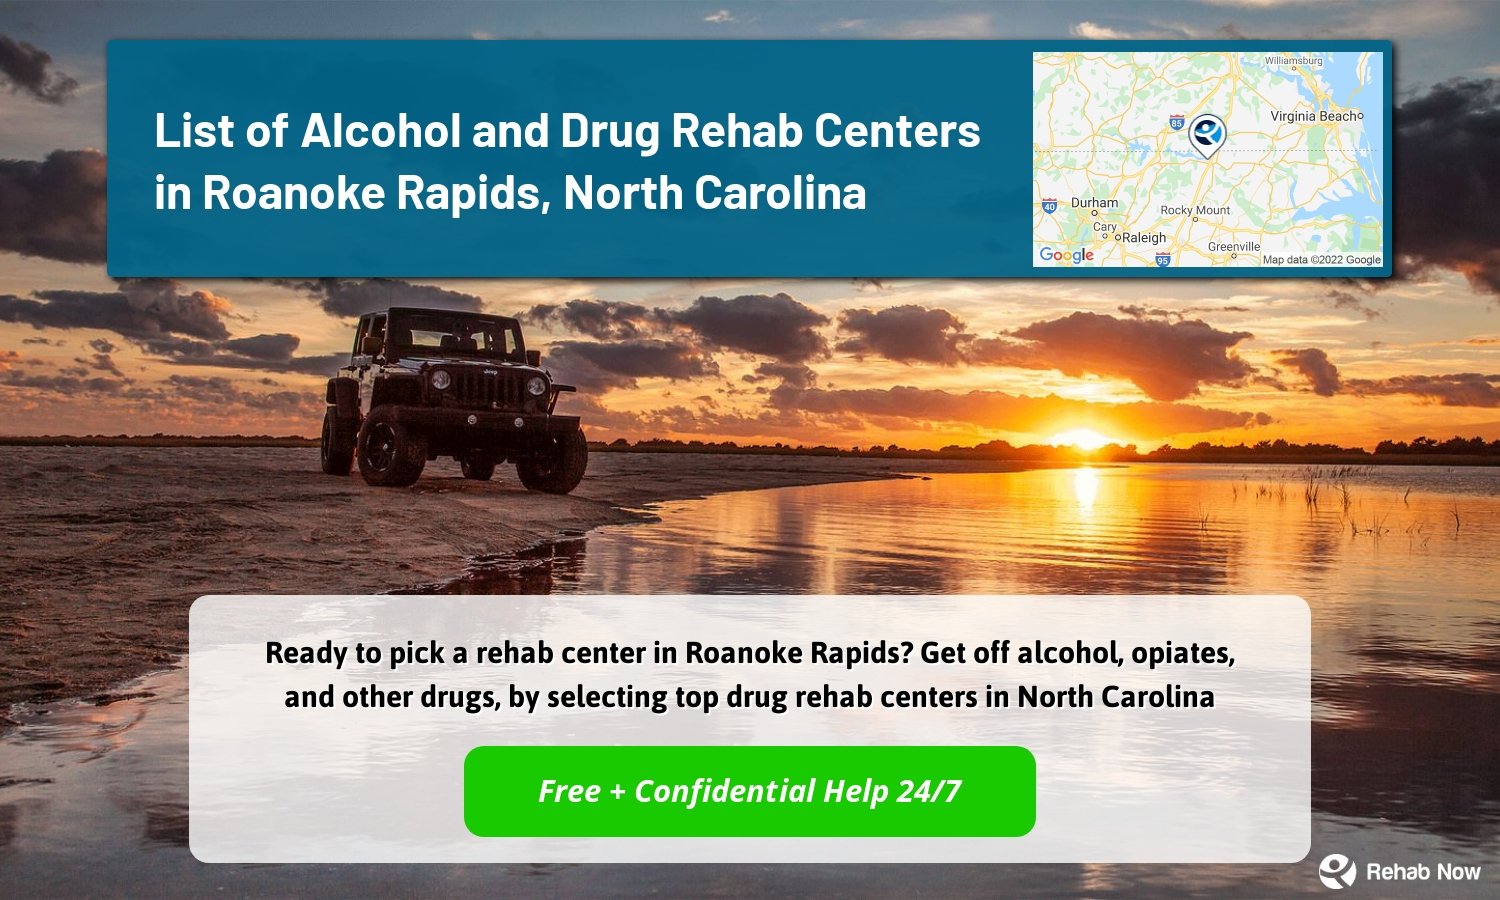 Ready to pick a rehab center in Roanoke Rapids? Get off alcohol, opiates, and other drugs, by selecting top drug rehab centers in North Carolina